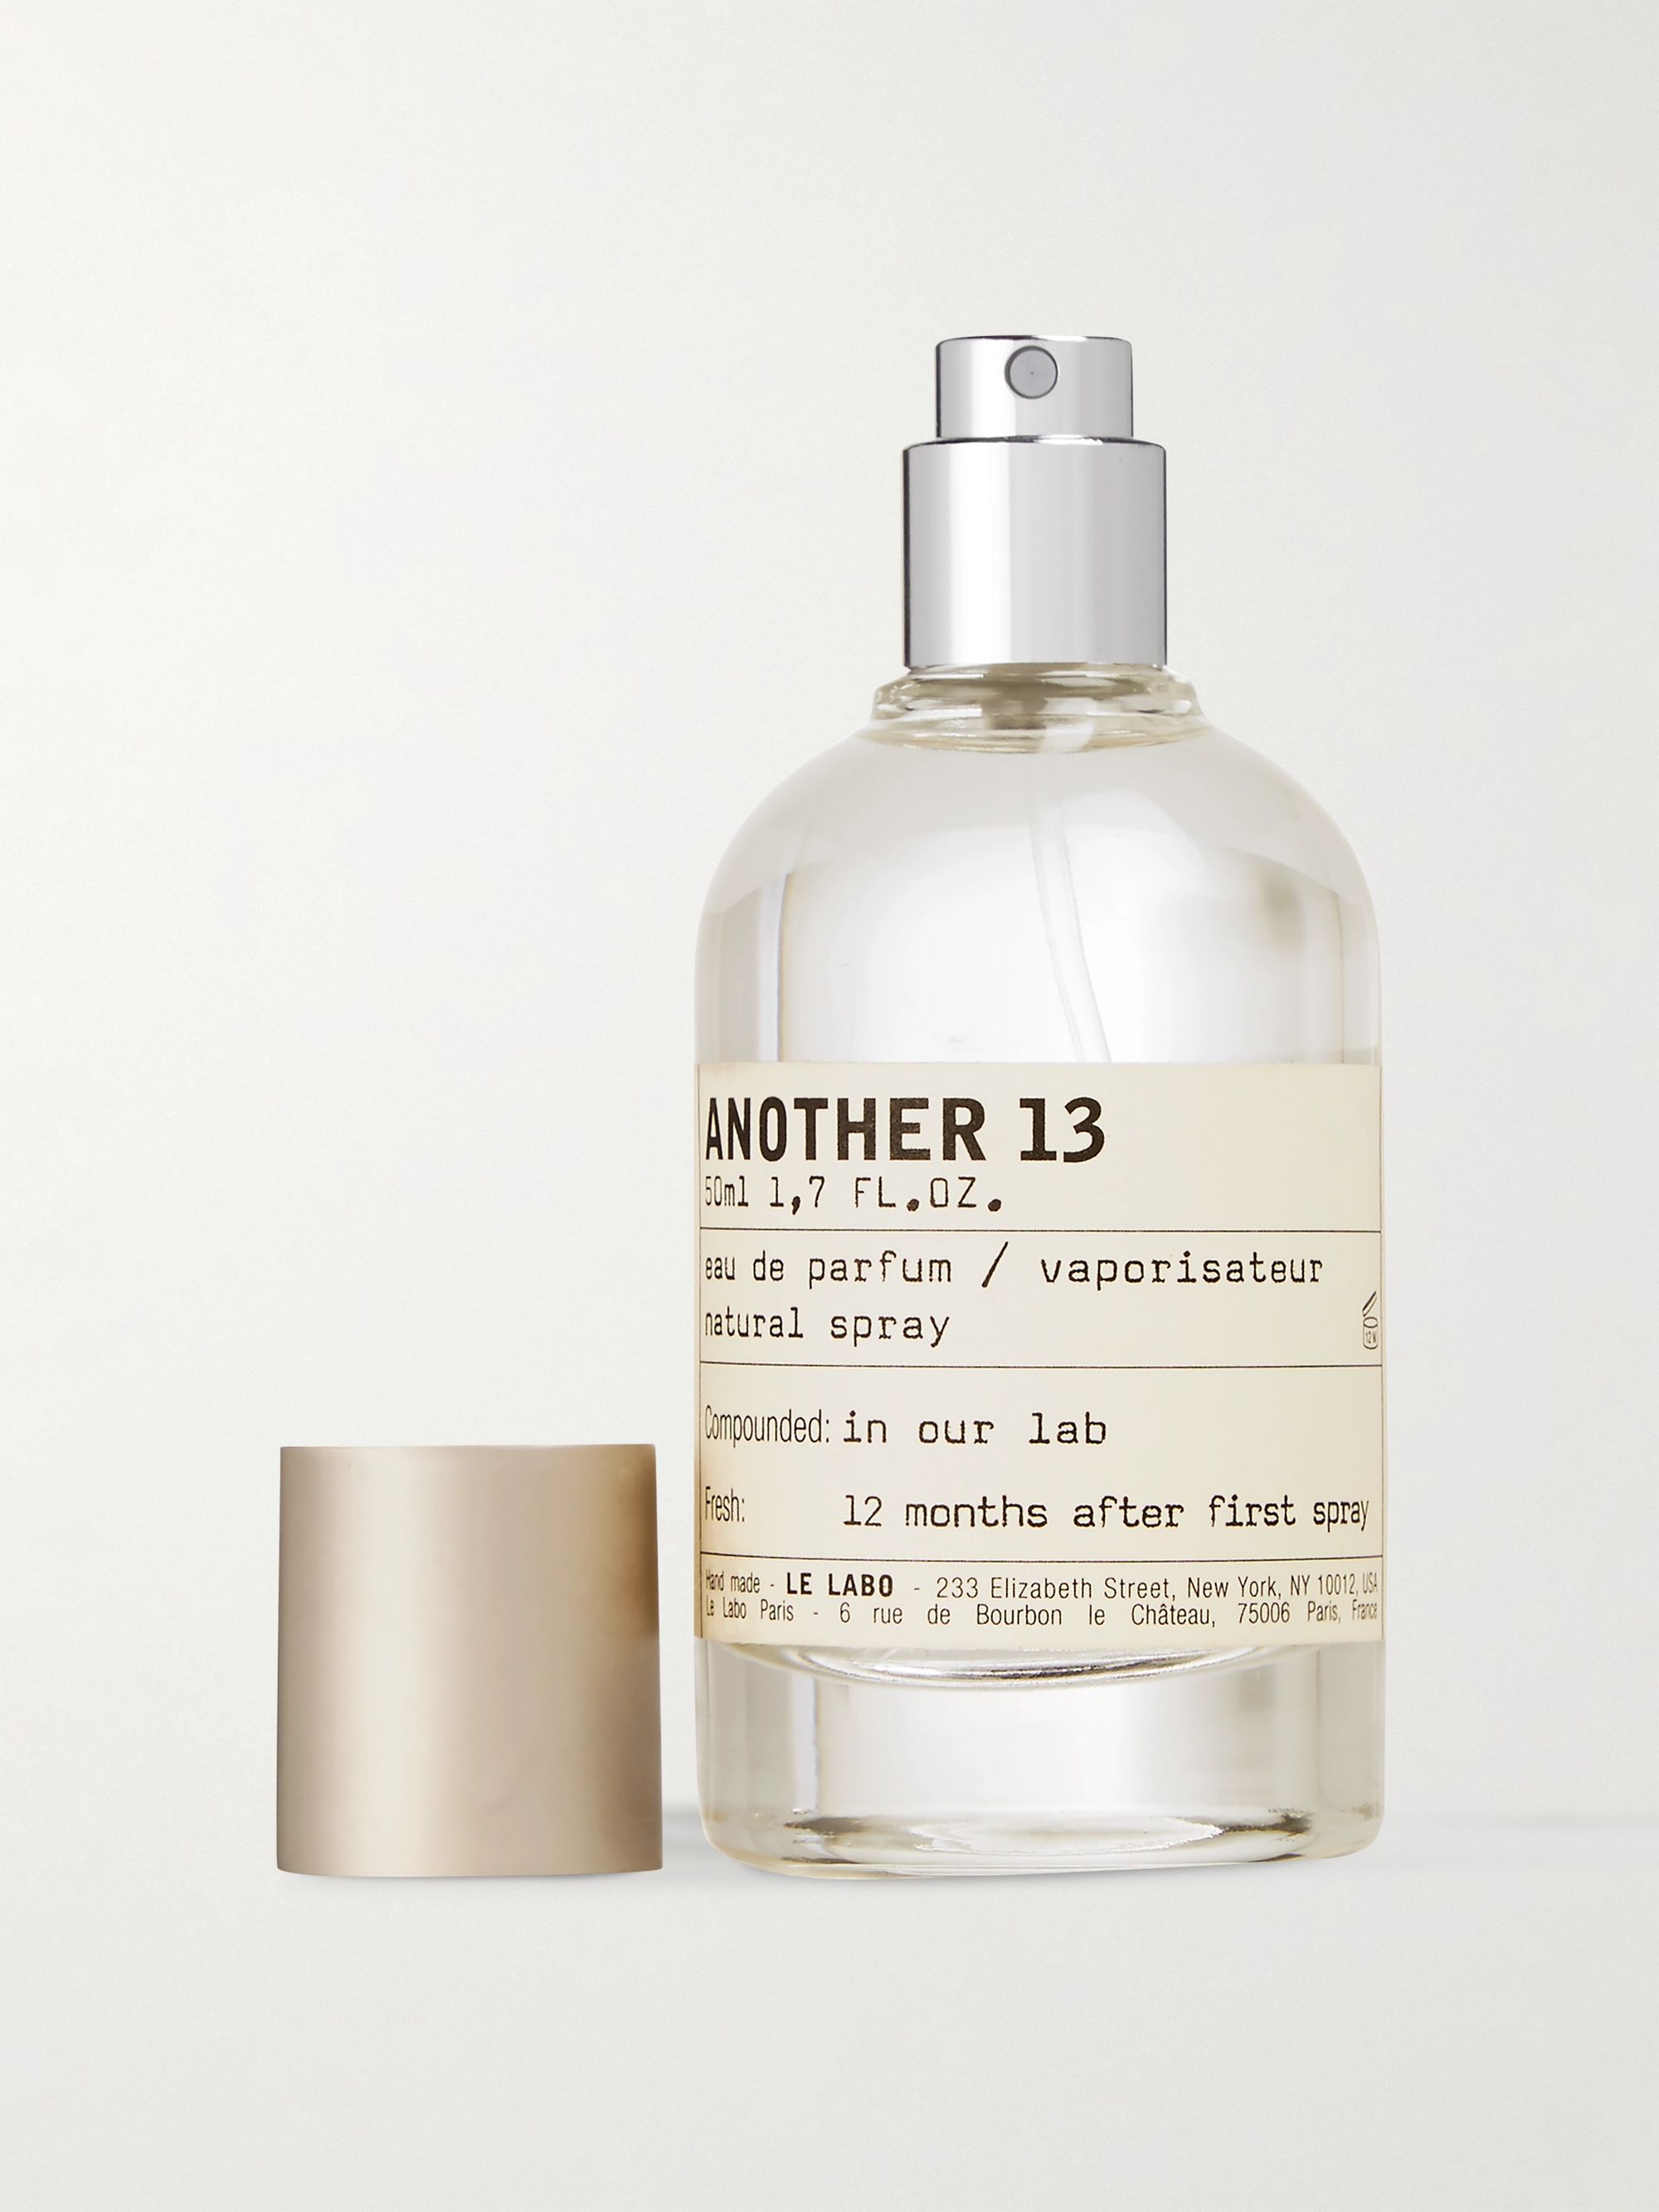 Another 13 купить. Le Labo another 13. Сантал 13 le Labo. Le Labo another 13 100 ml. Le Labo another 13 15 мл.